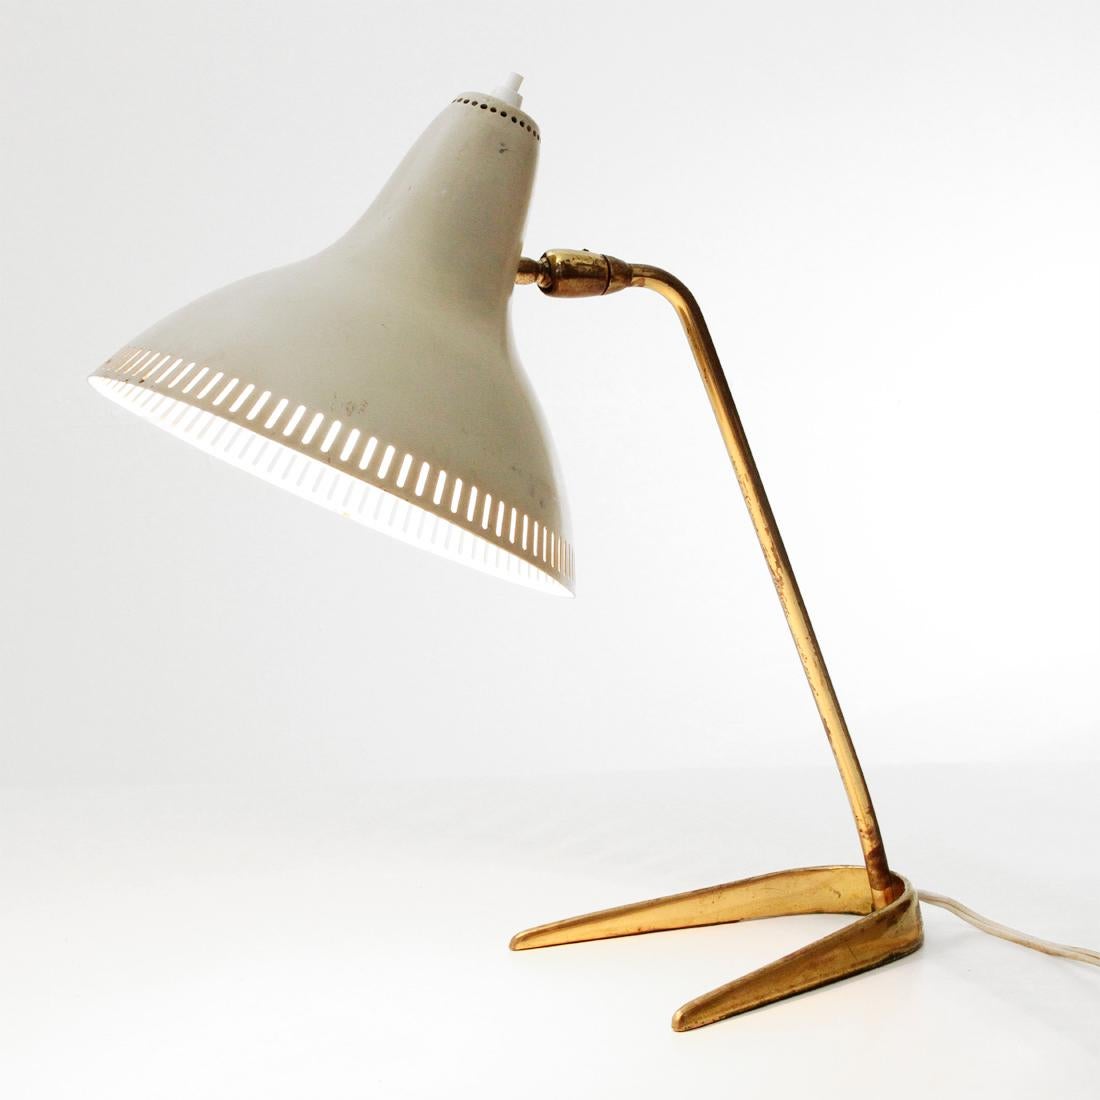 Table lamp produced in the 1950s.
Brass structure with horseshoe base.
White painted aluminum diffuser with decorative holes.
Good general conditions, some signs due to normal use over time.

Dimensions: Height 38 cm, diameter 20 cm, depth 35